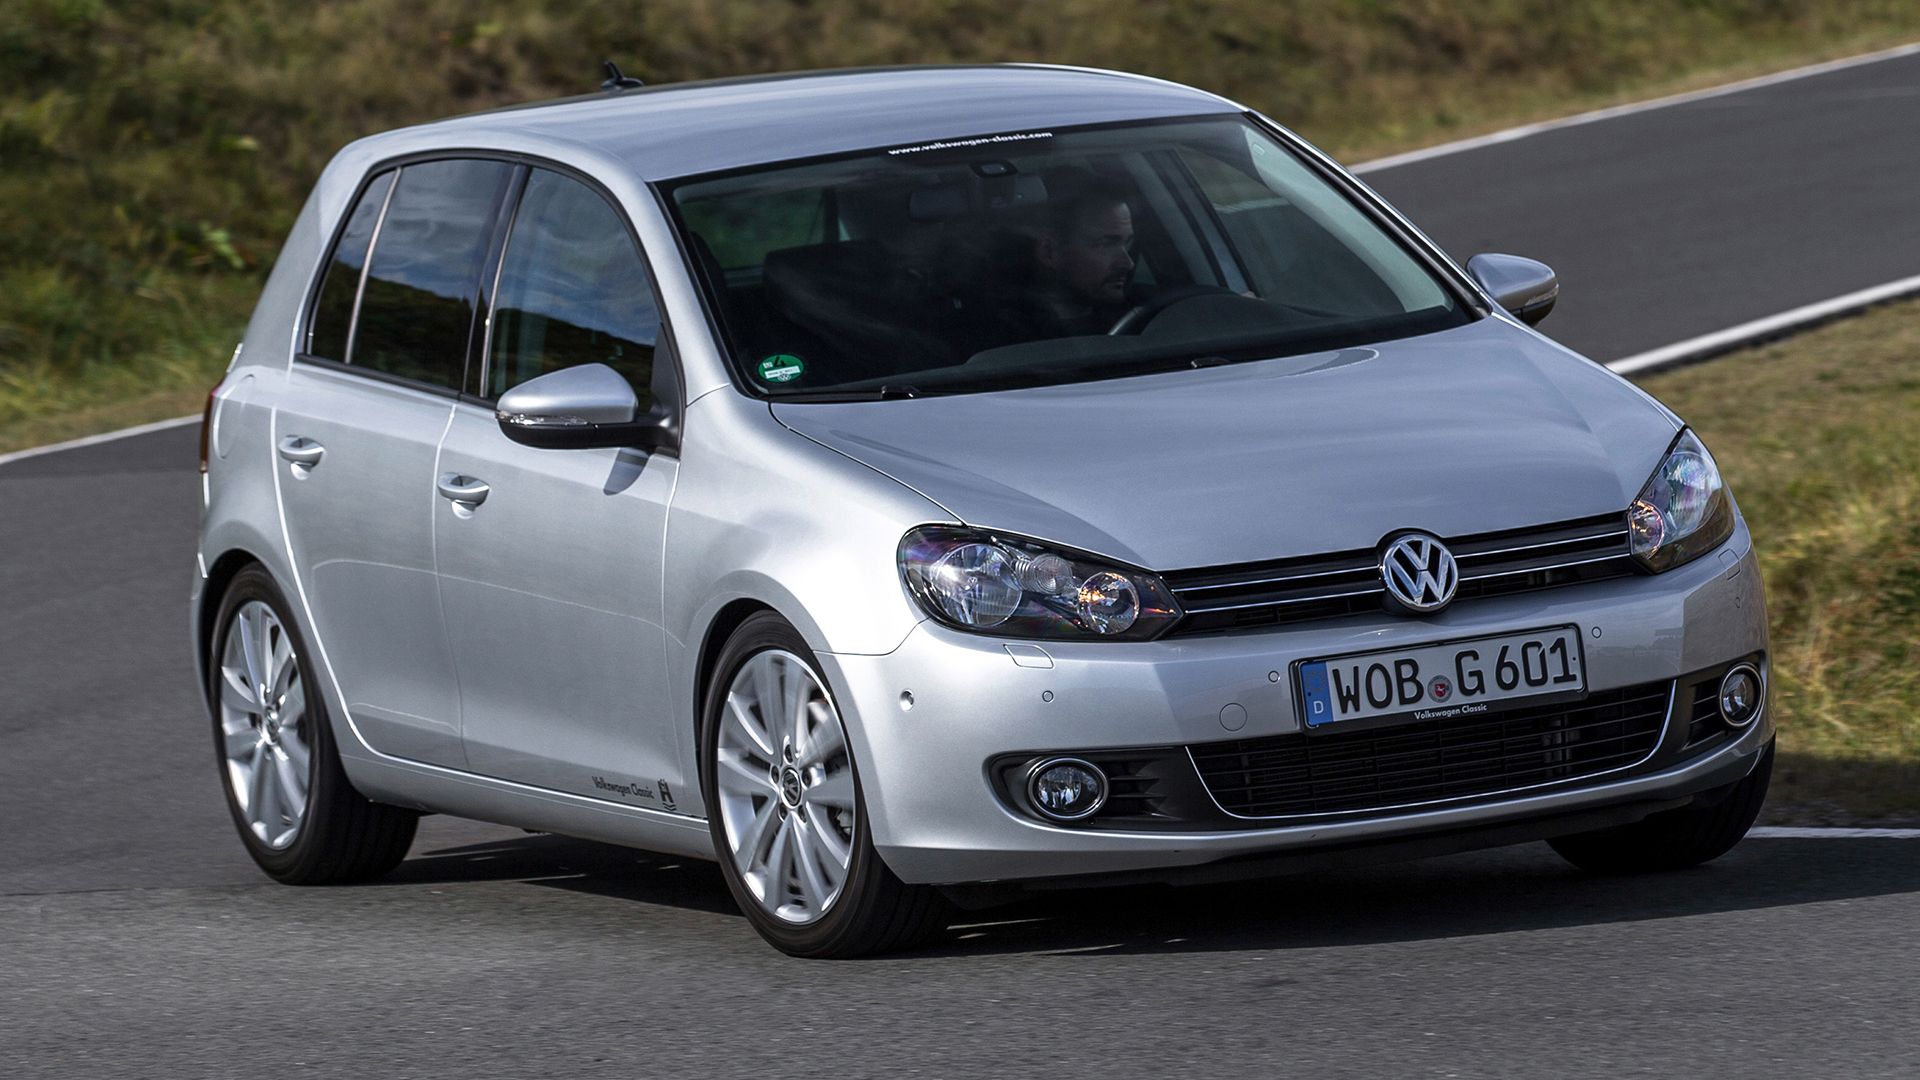 Exterior shot of the 6th generation Golf 